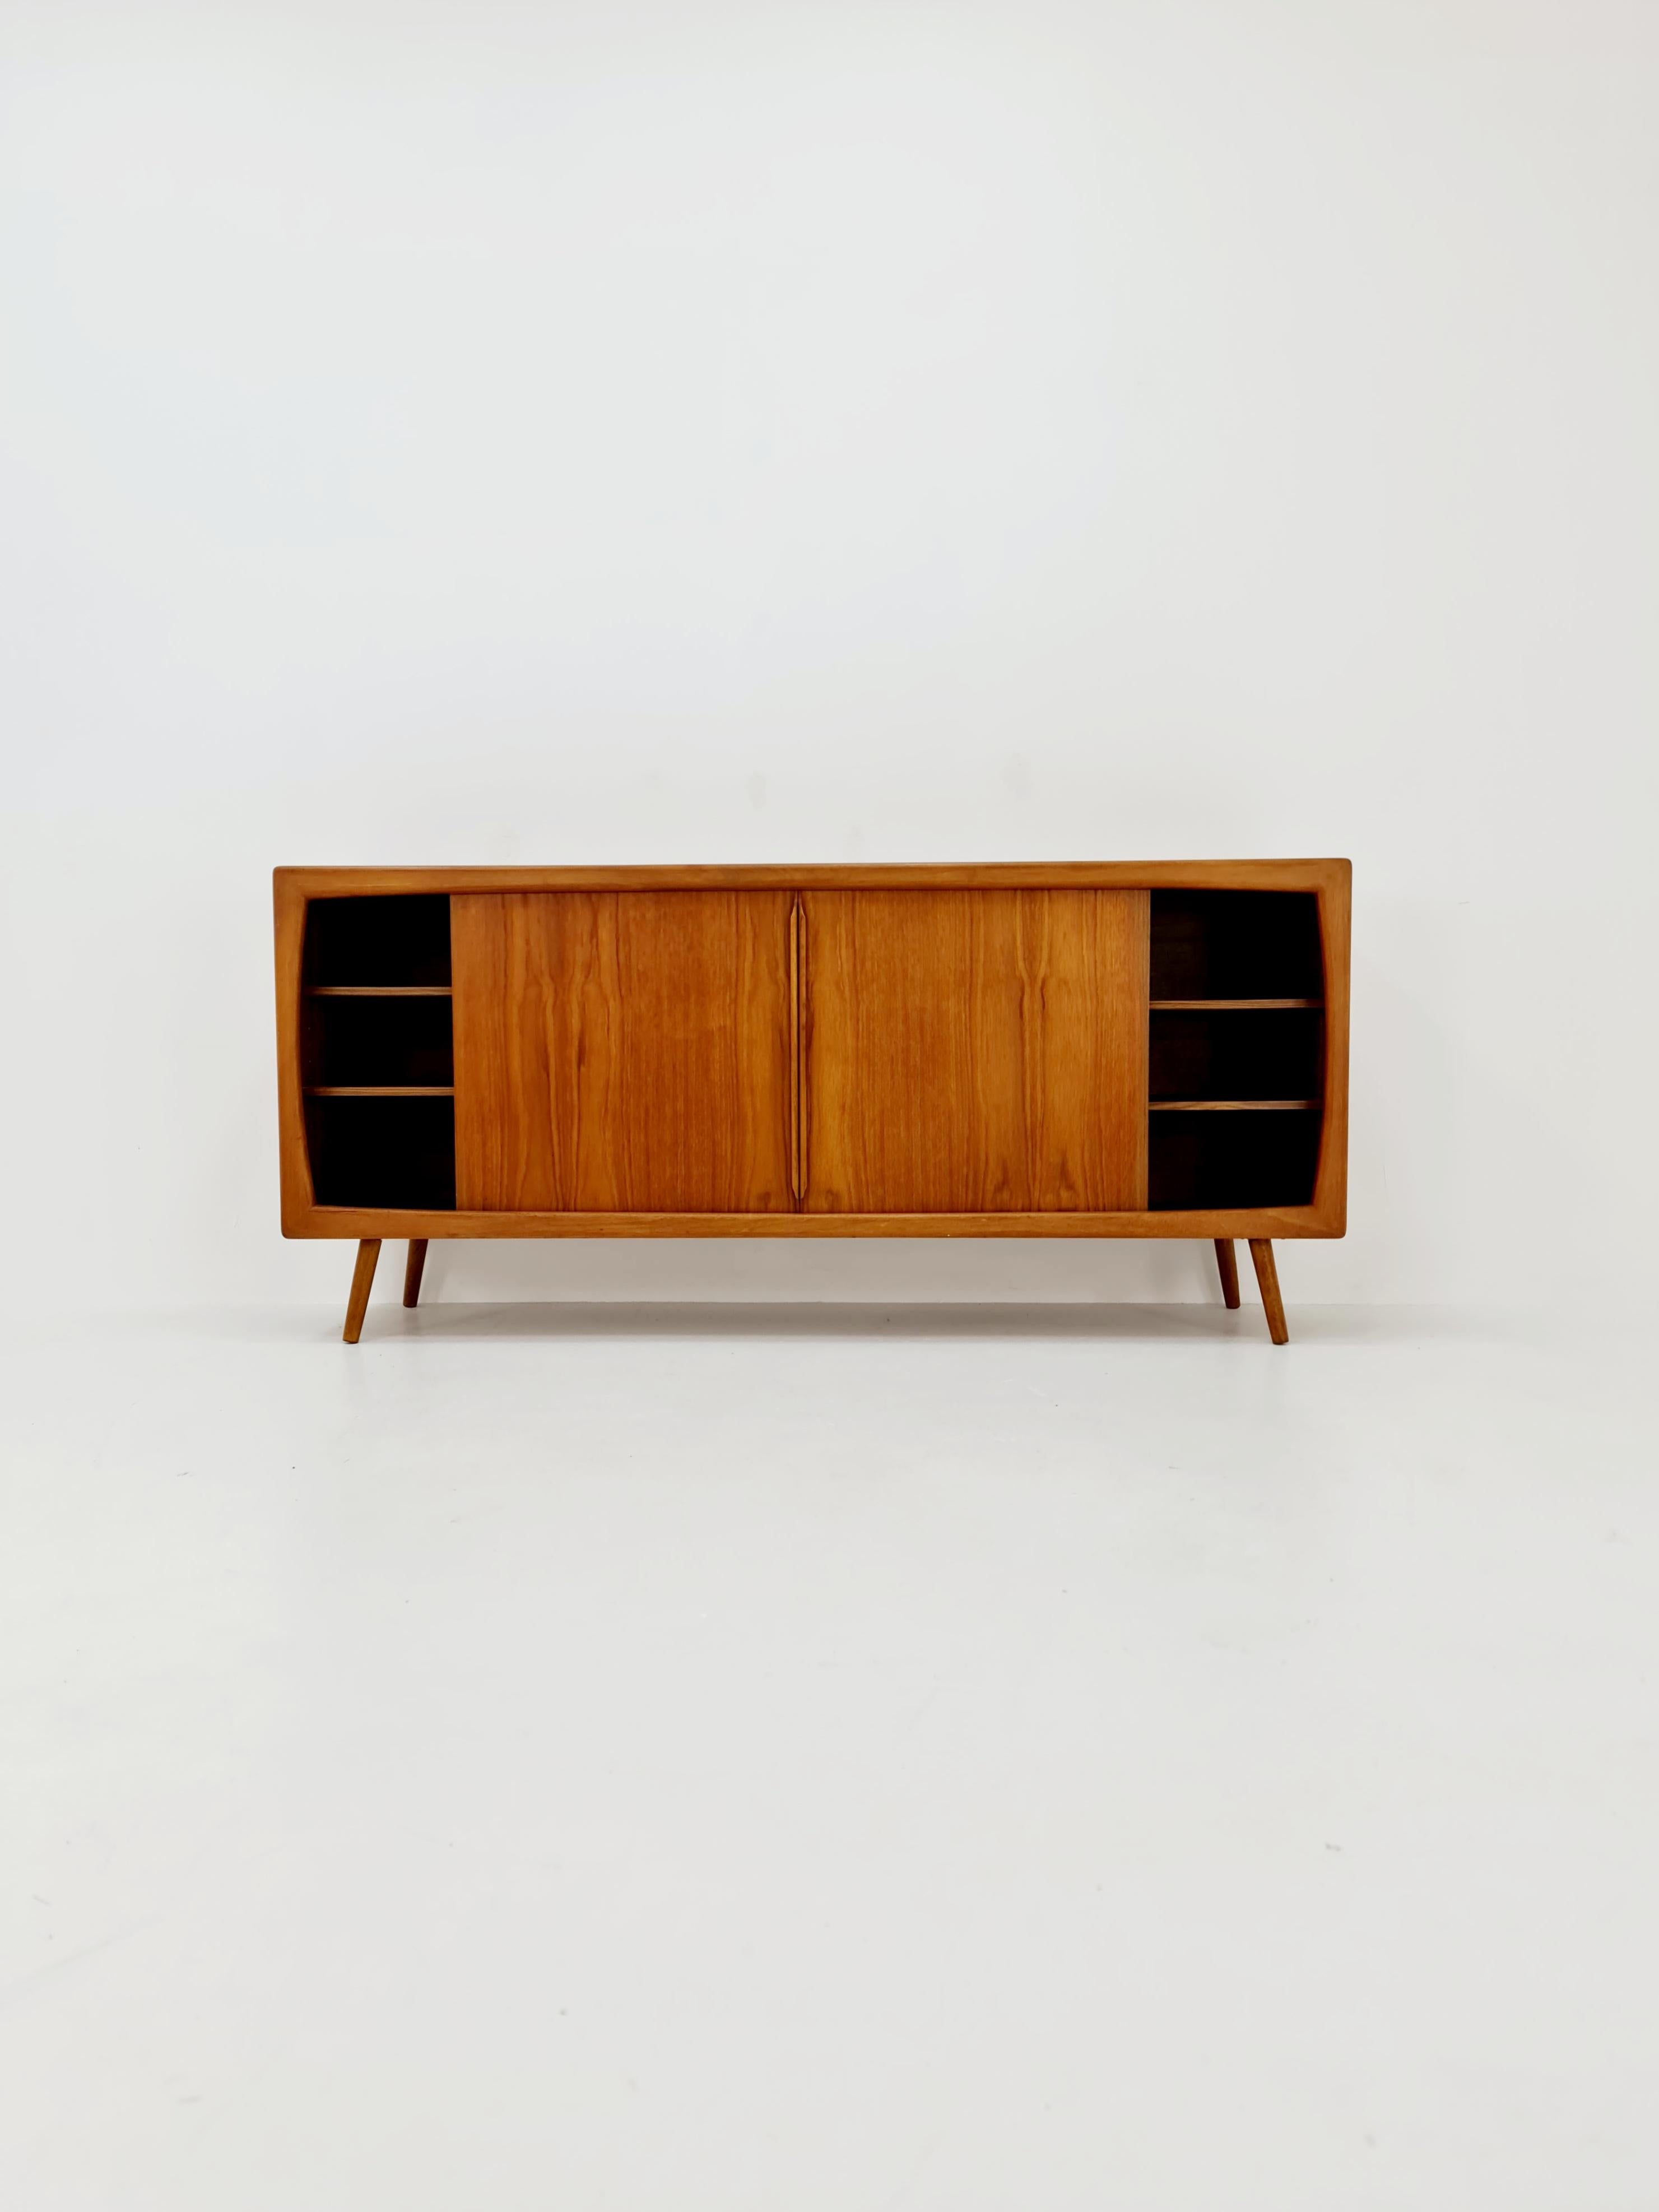 Midcentury Danish Teak Sideboard by Dyrlund , 1960s

Danish Design

Dimensions: 
50  D x 200 W x 91  H cm

It is in good vintage condition, however, as with all vintage items some minor wear marks should be expected.

Please inquiry for prices to